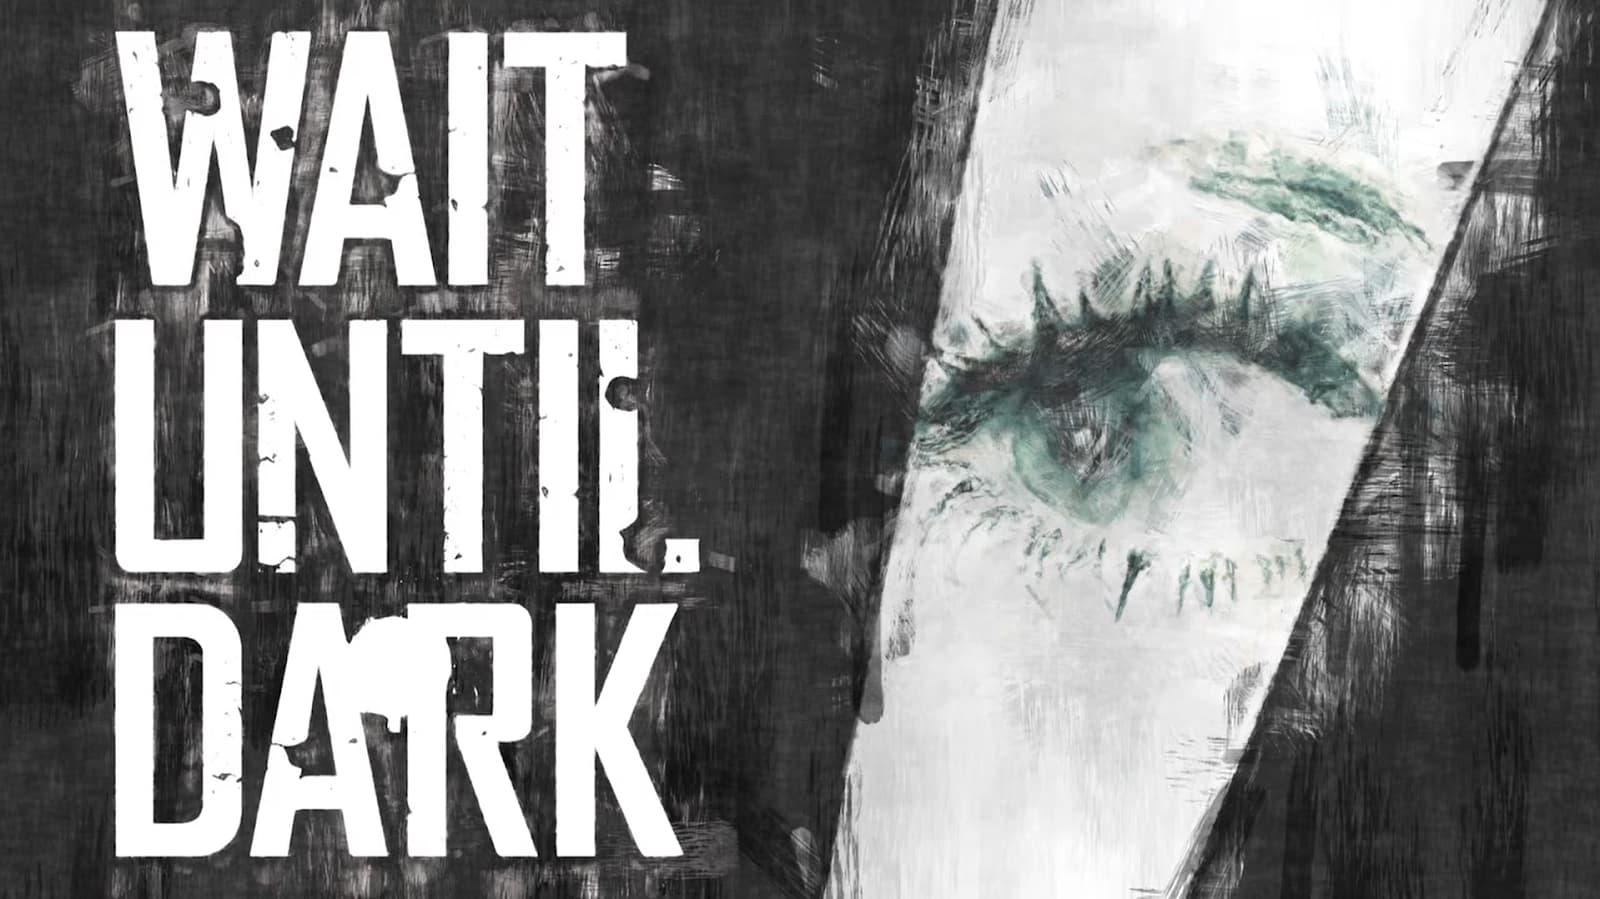 Artistic poster for the play "Wait Until Dark" with abstract imagery